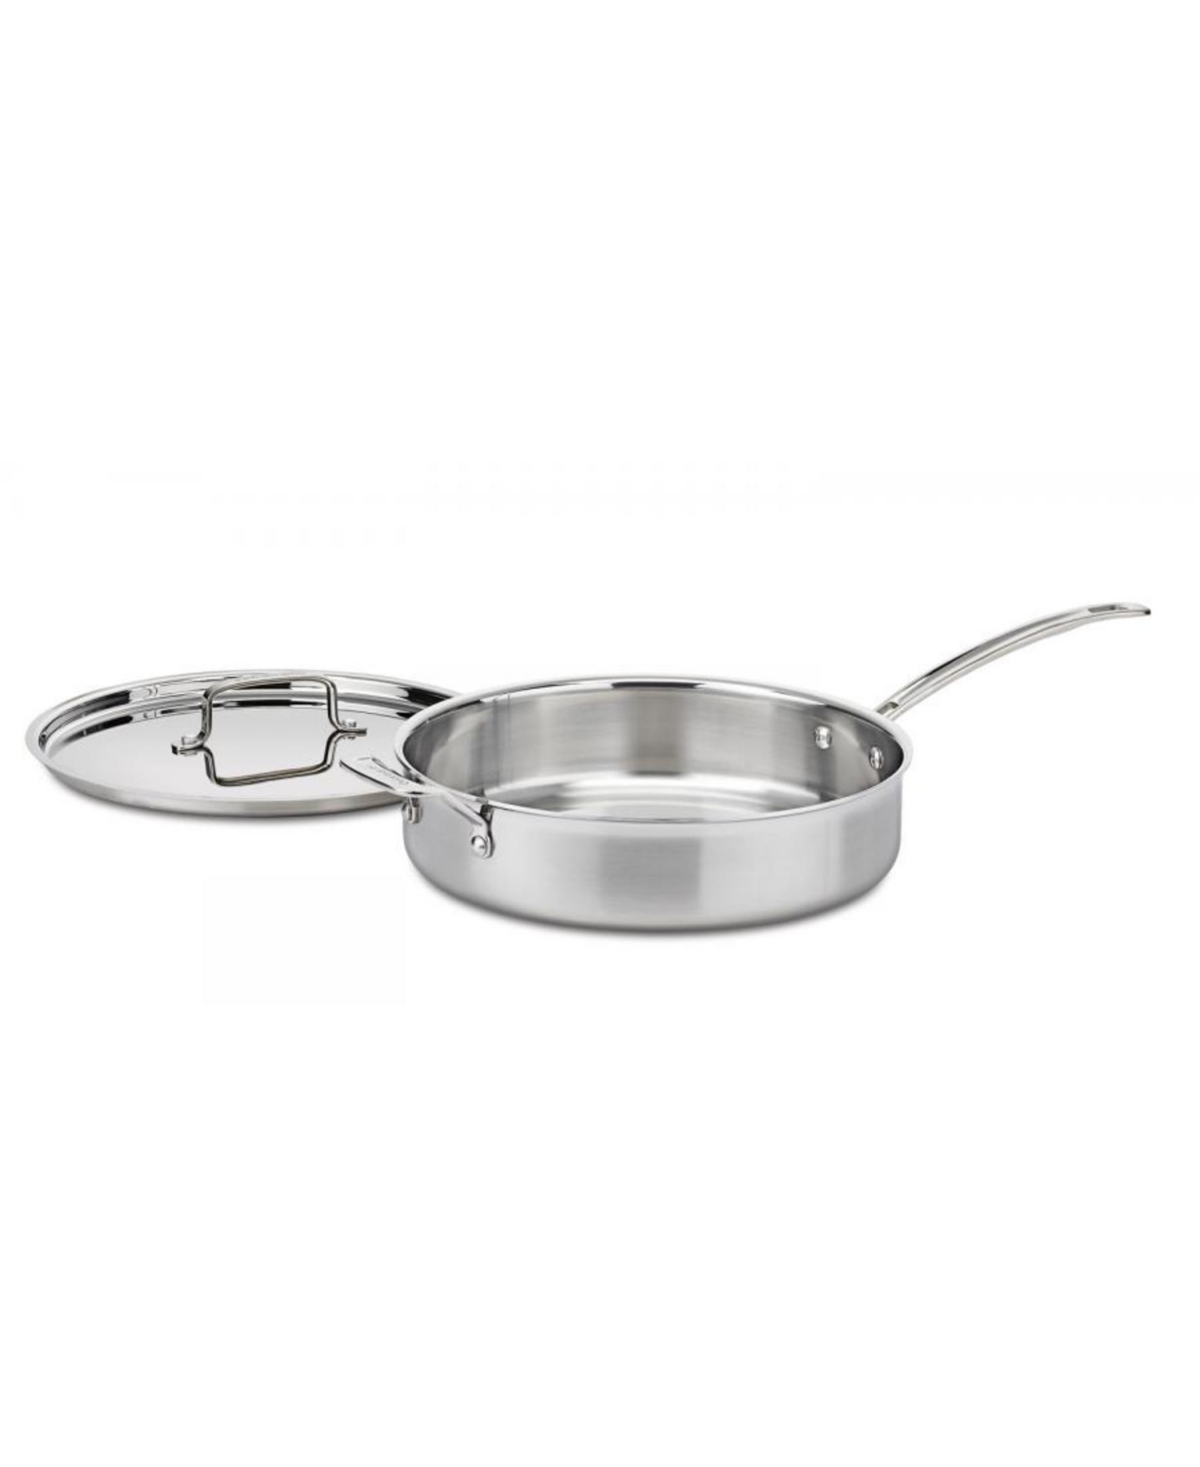 Cuisinart Multiclad Pro 5.5-qt. Saute Pan With Cover In No Color